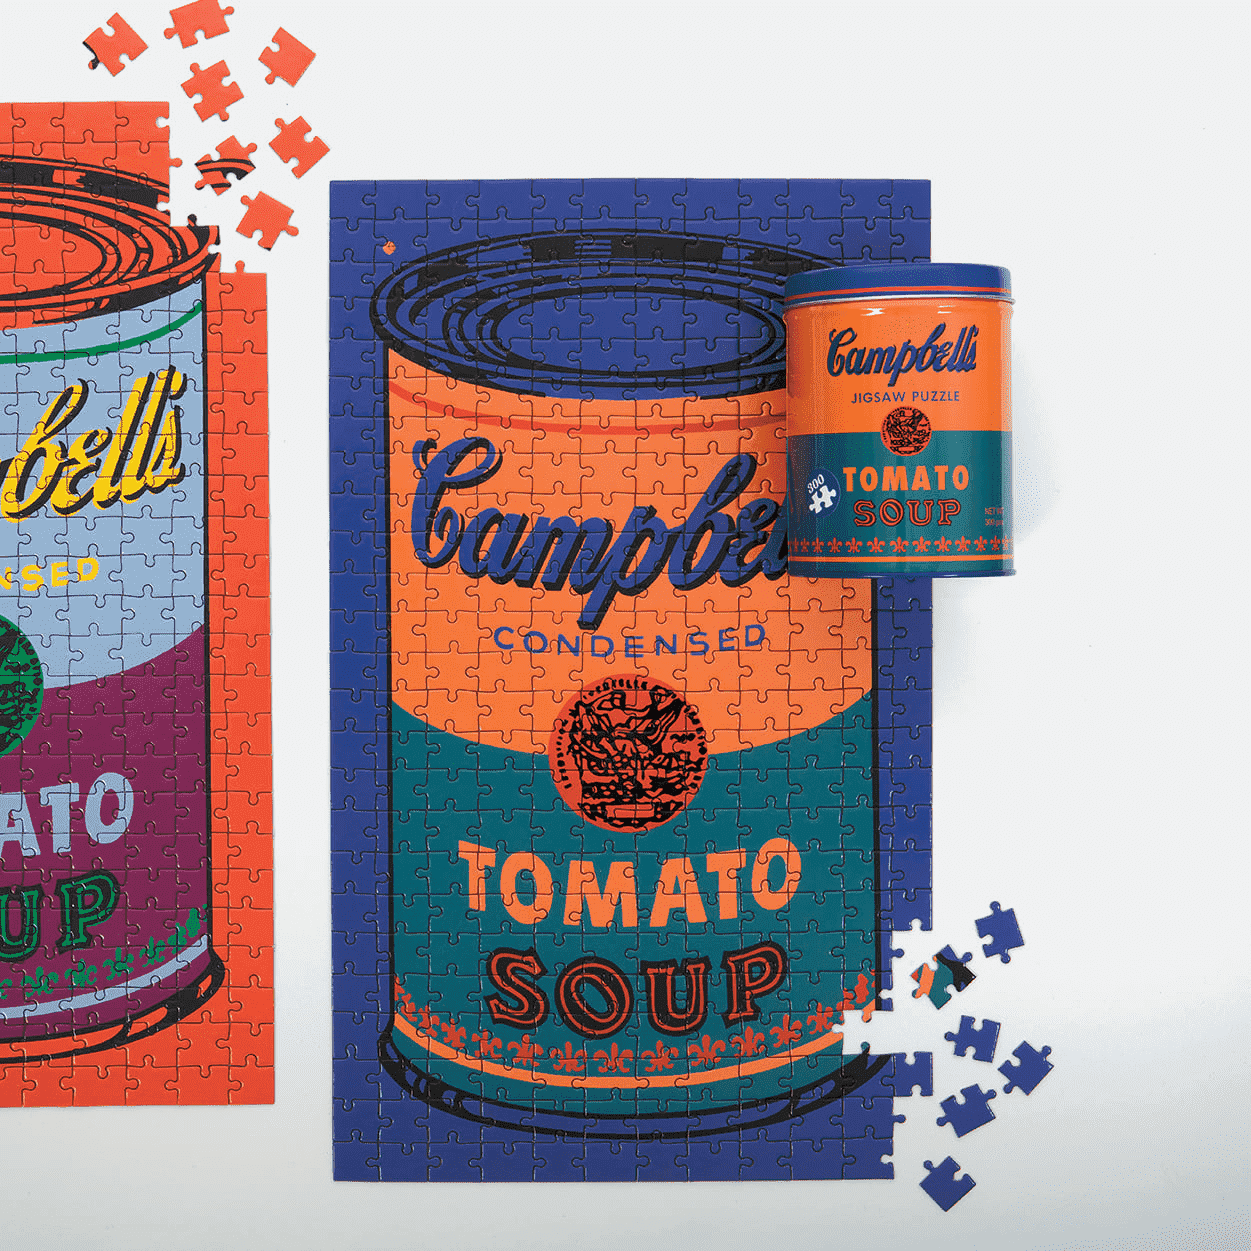 Andy Warhol Soup Can Crayons + Sharpener [Book]